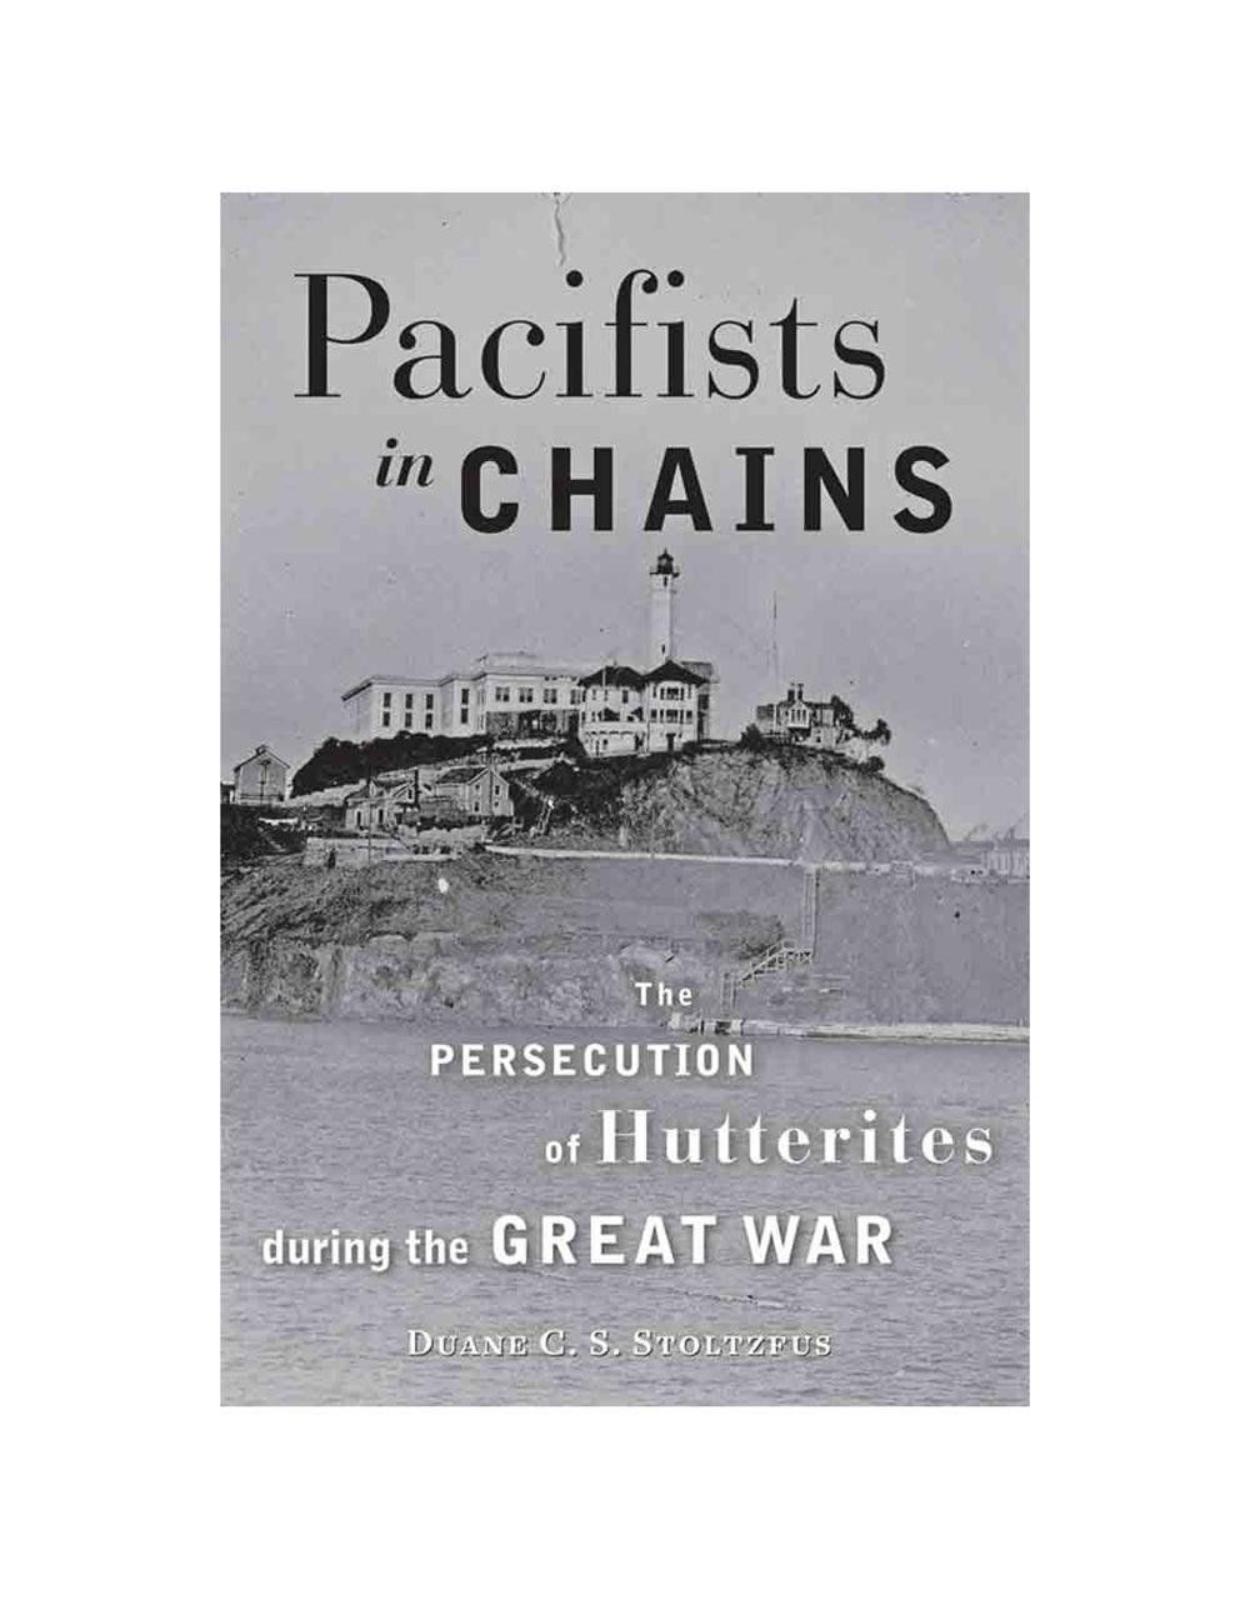 Pacifists in Chains. The Persecution of Hutterites during the Great War